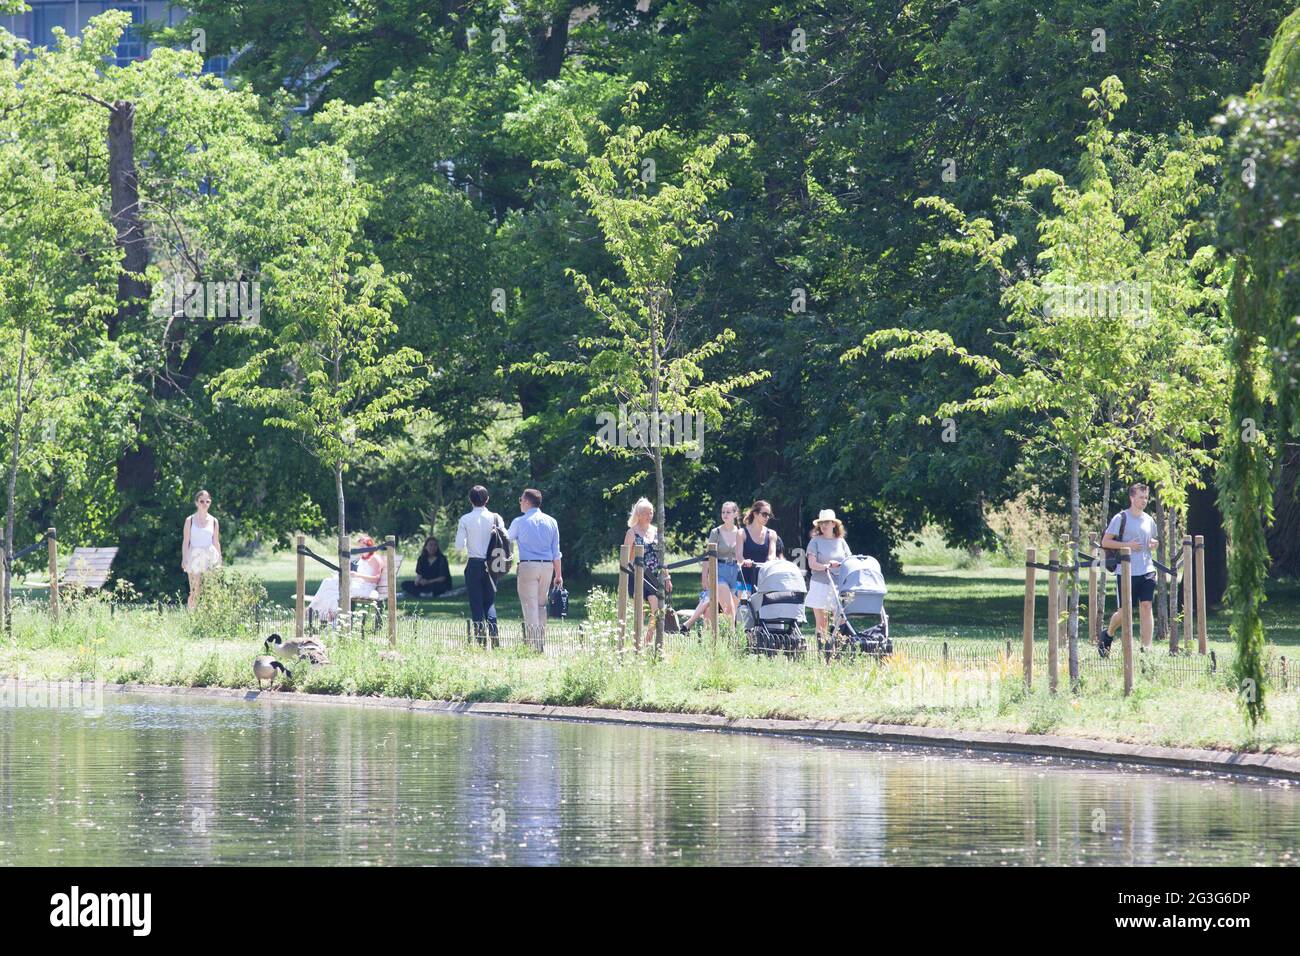 UK Weather, London: on the hottest day of the year so far, with temperatures expected to reach 29 centigrade, Londoners use Regent's Park to cool off or enjoy the sun. Some go on the pedallos, others hire a deckchair or grab a bench. Some are in bikinis, others fully clothed and even with face masks on outdoors. A cooling breeze makes the sun bearable but many stay in the shade. Anna Watson/Alamy Live News Stock Photo